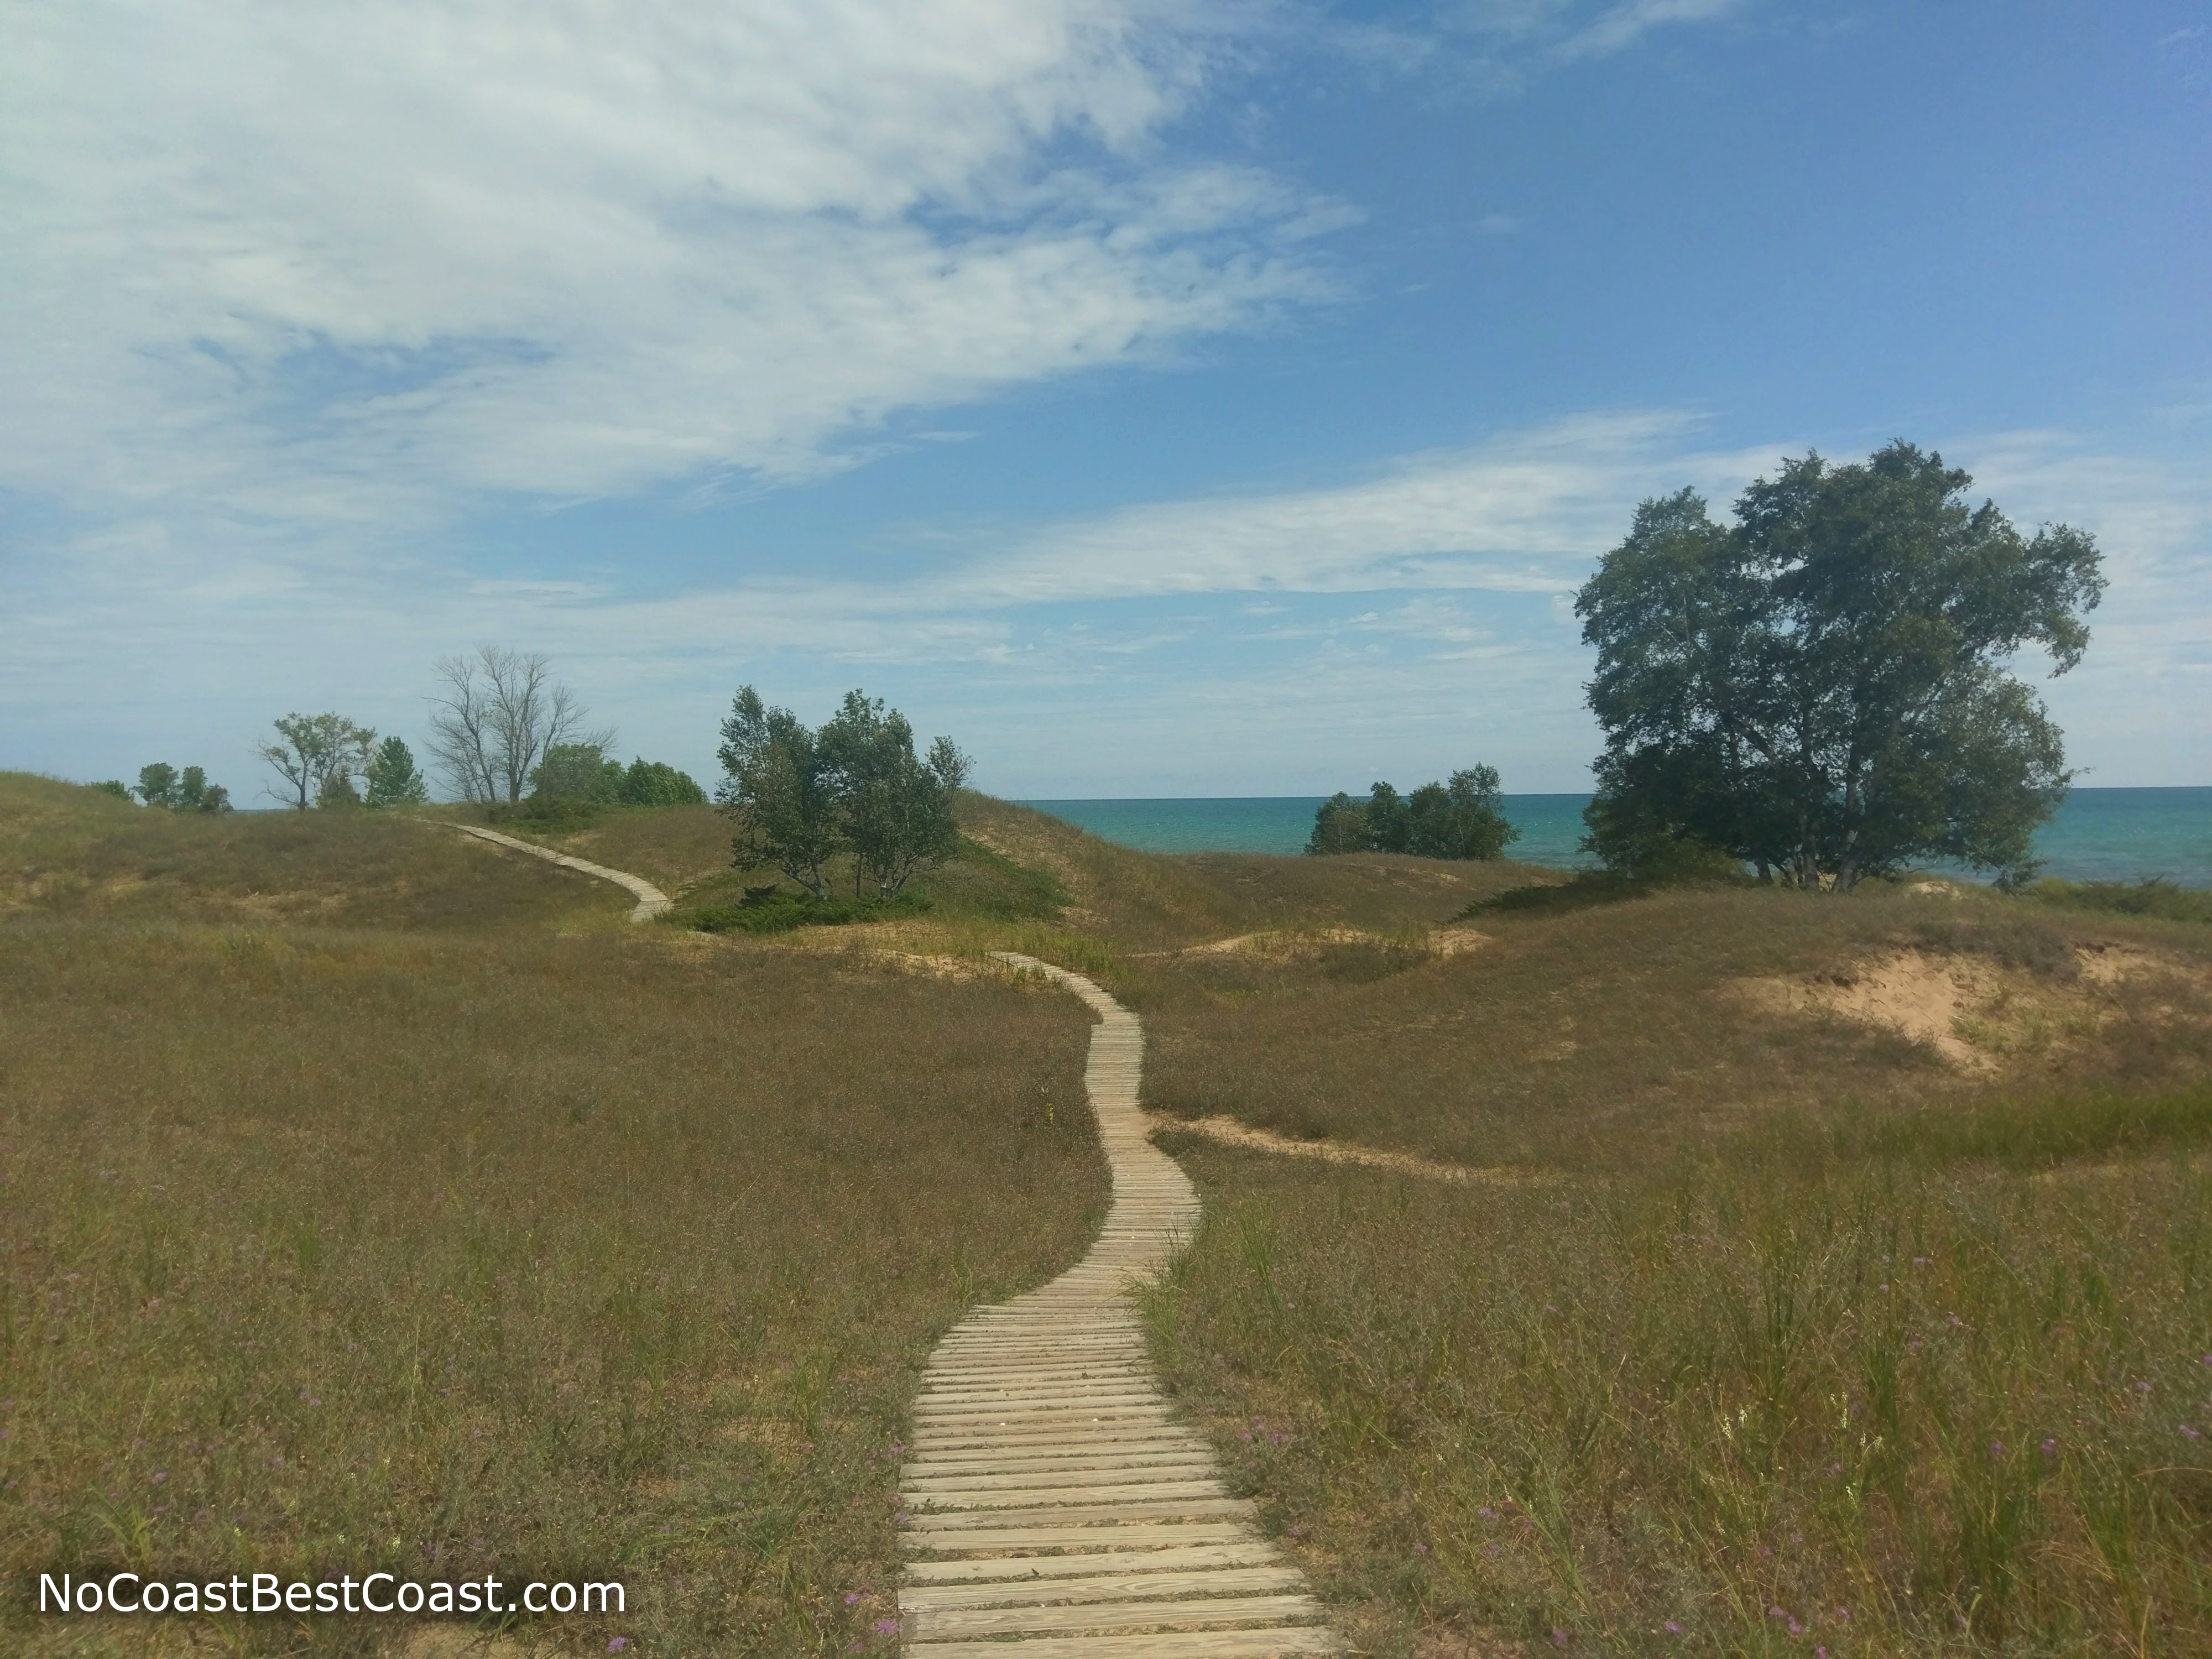 The cordwalk over the dunes with Lake Michigan in the background